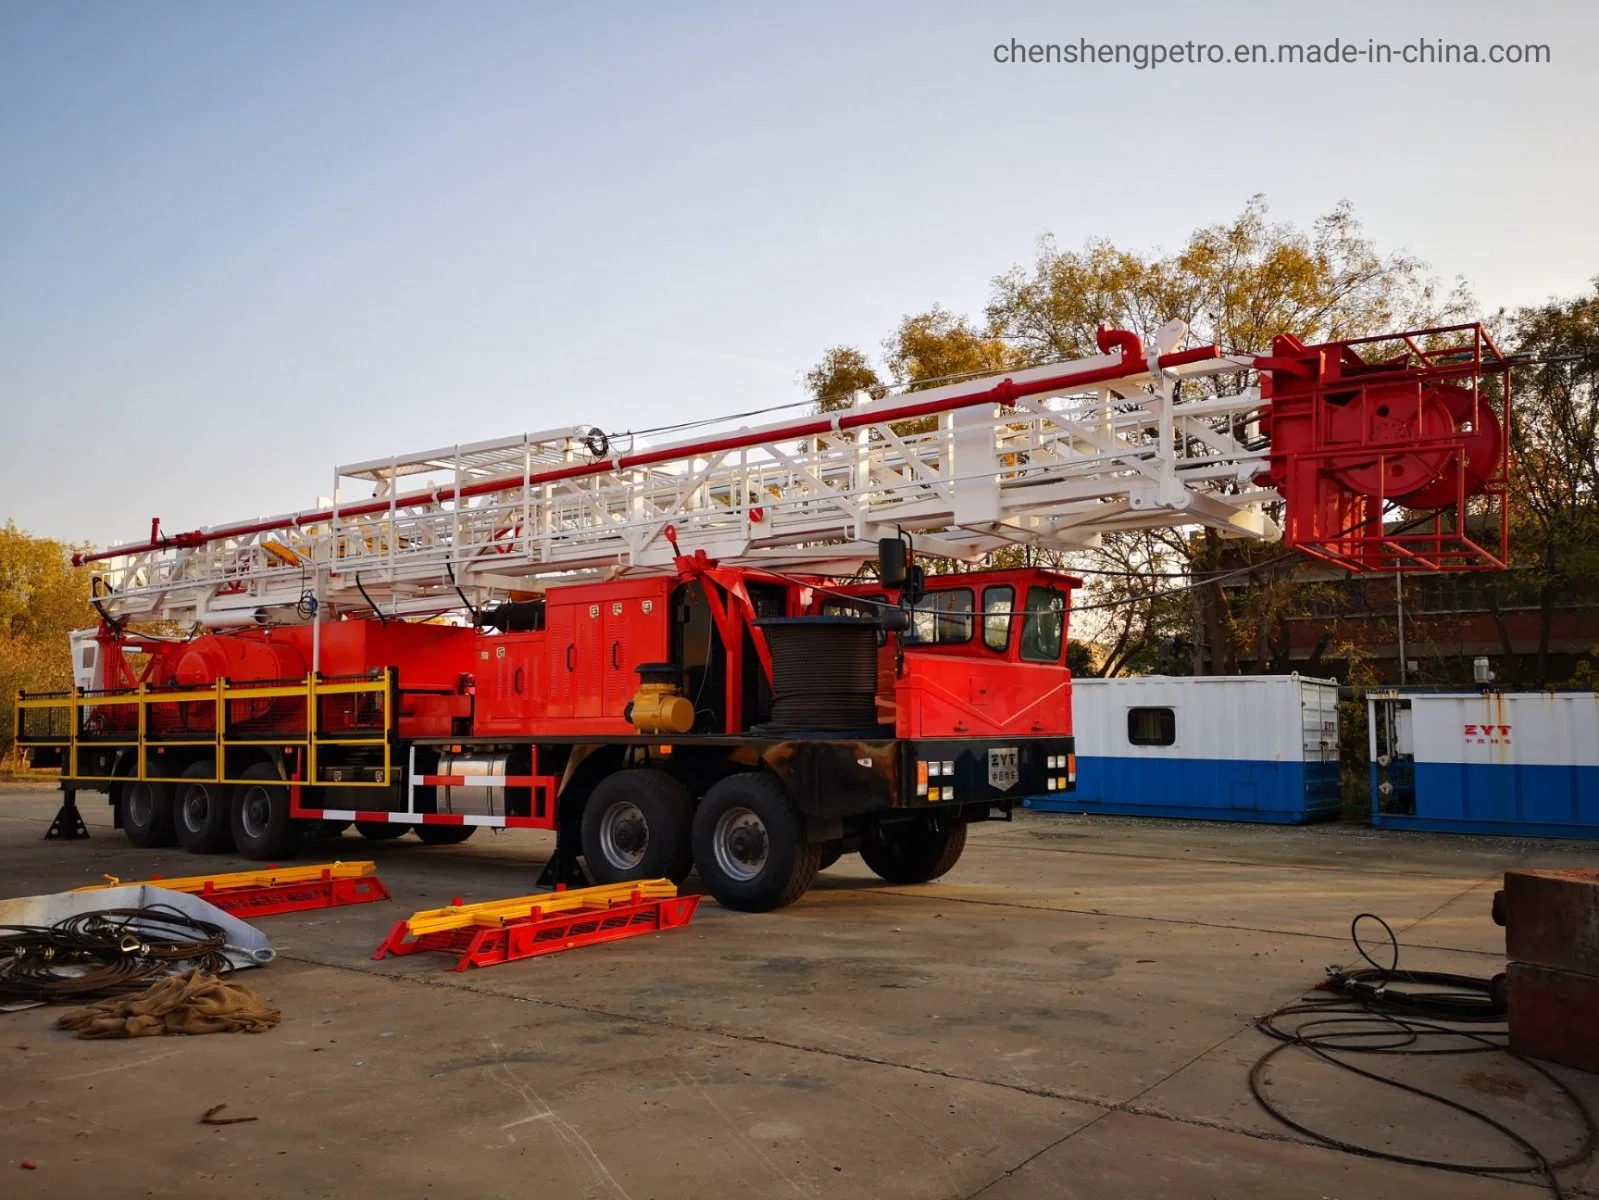 Self-Made Chassis API Xj550 Workover Rig Zj15 15000m110t Truck Mounted Drilling Rig Zyt Petroleum Sj for Repair Oil Well